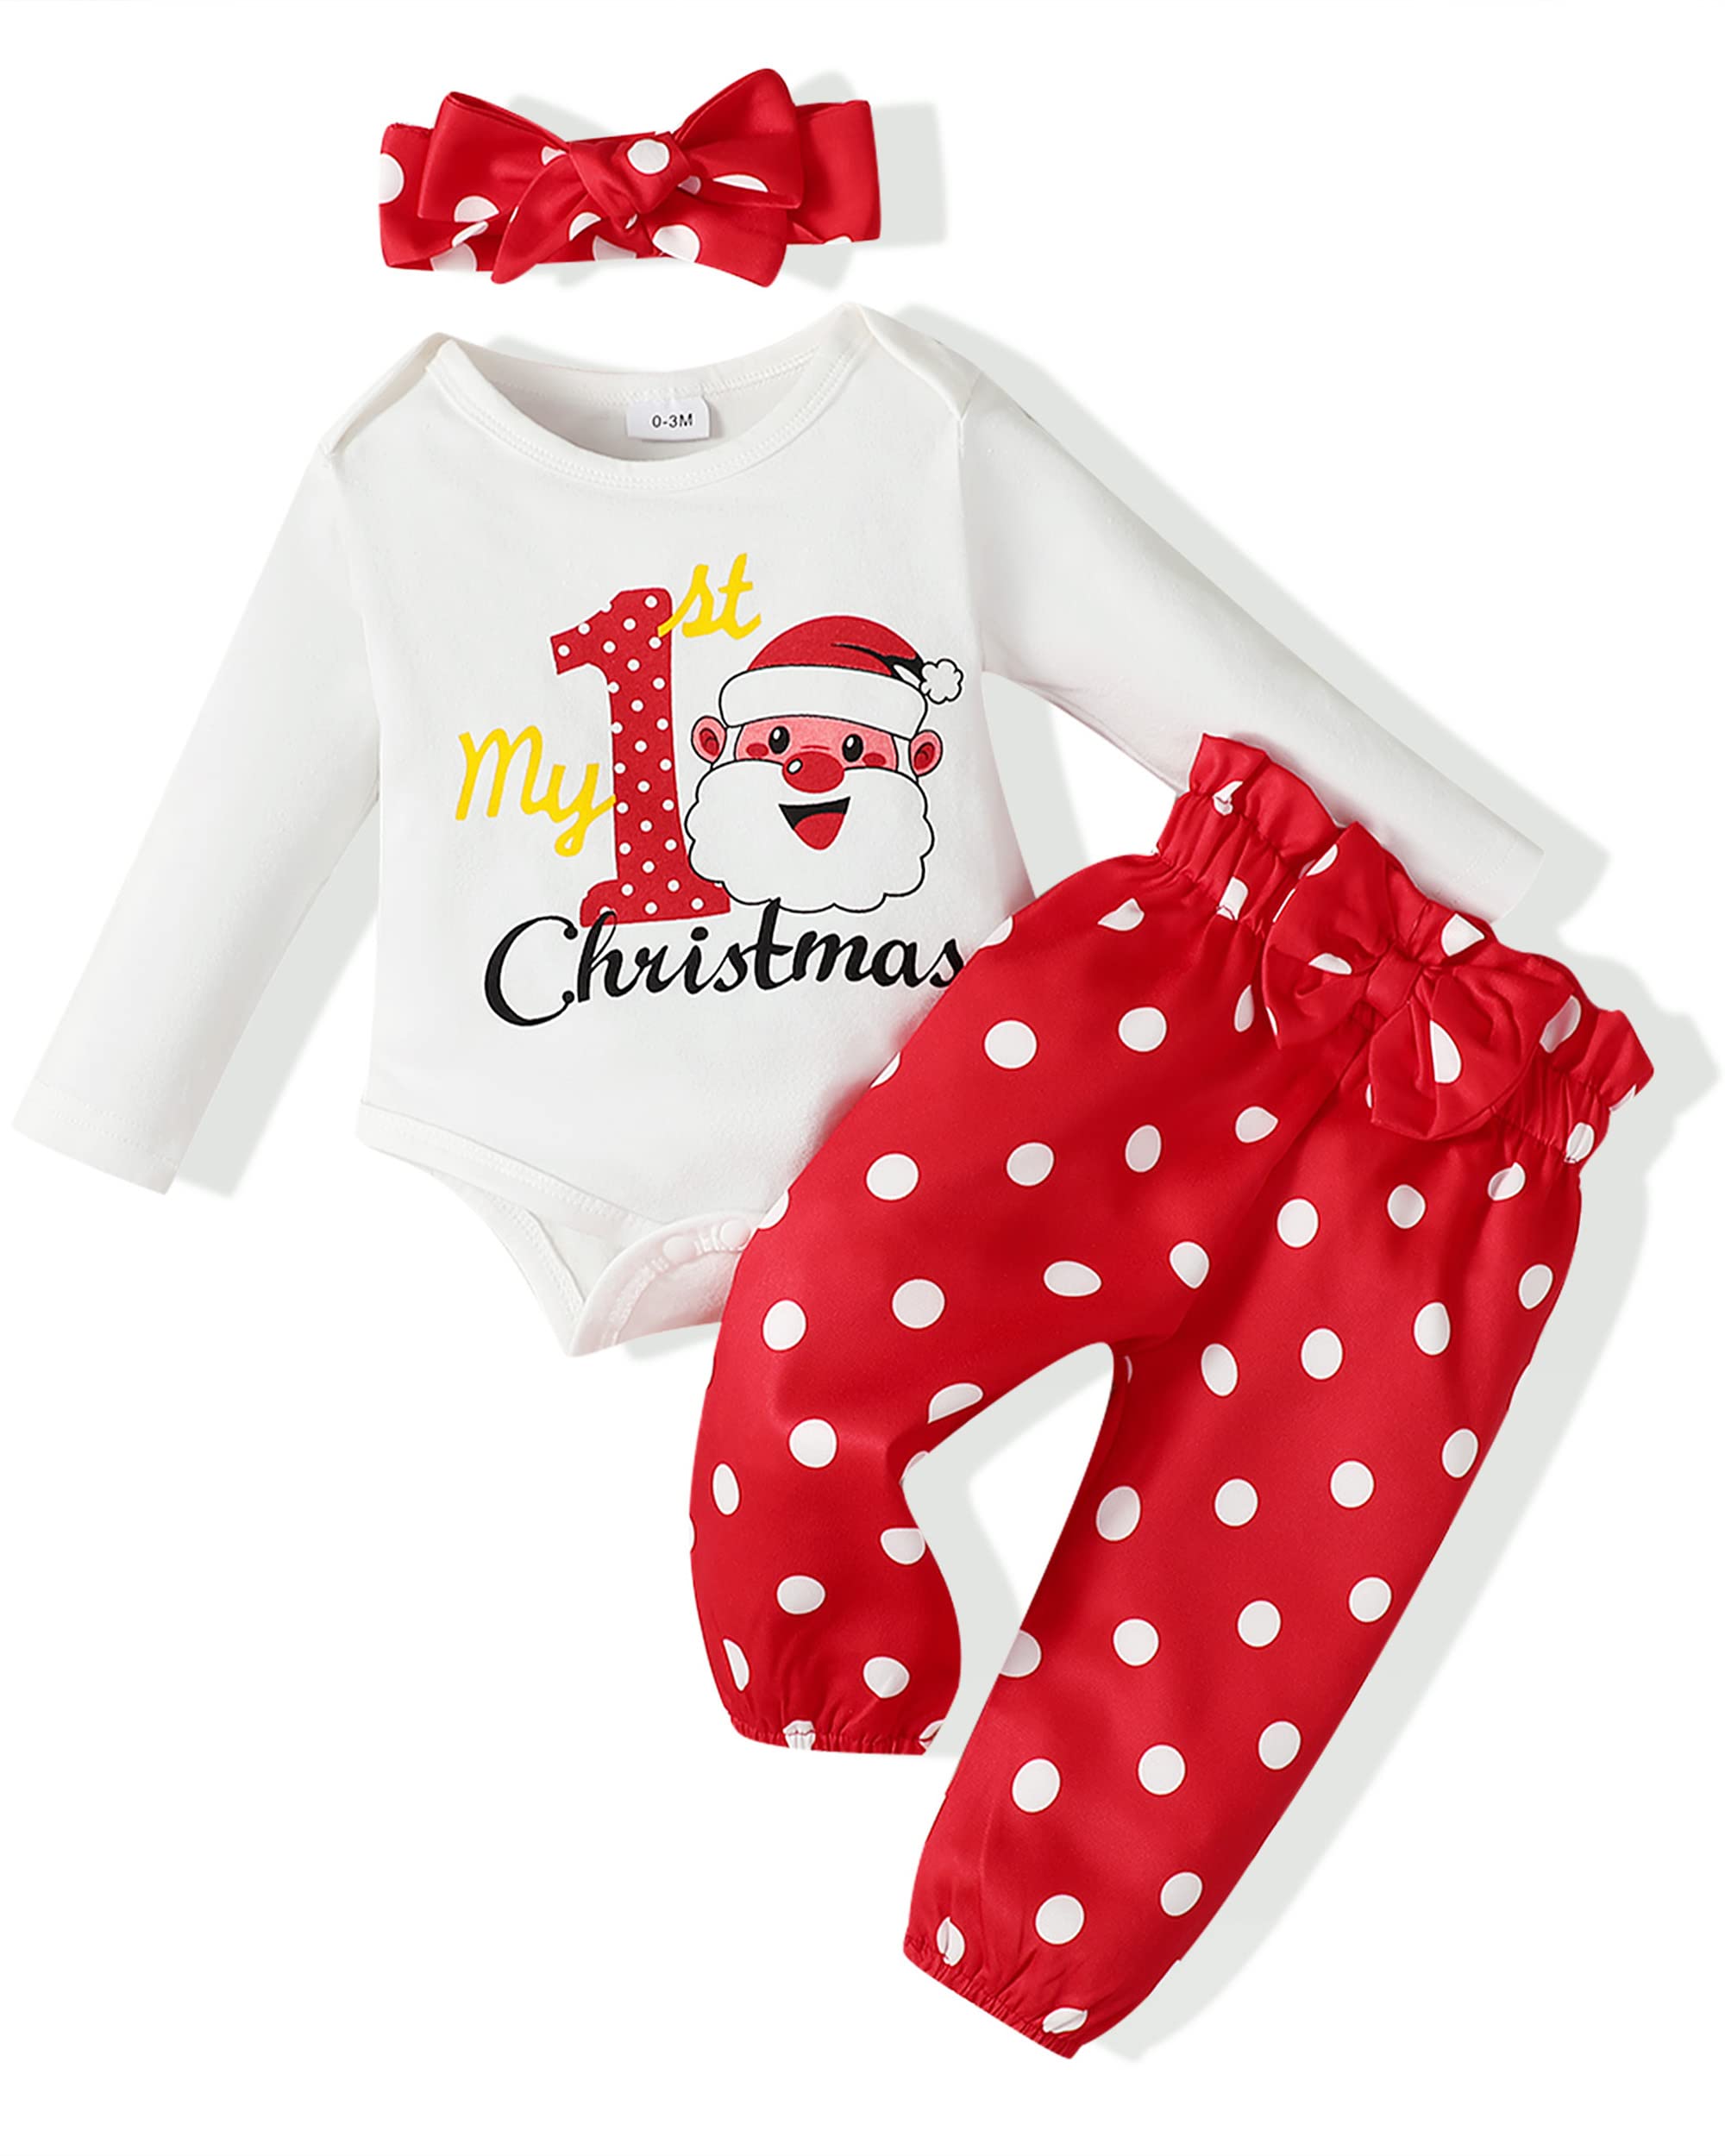 Renotemy Toddler Girl Christmas Clothes Outfits Christmas Baby Girl Gifts Christmas Romperpantshat Baby Clothes 12-18 Months